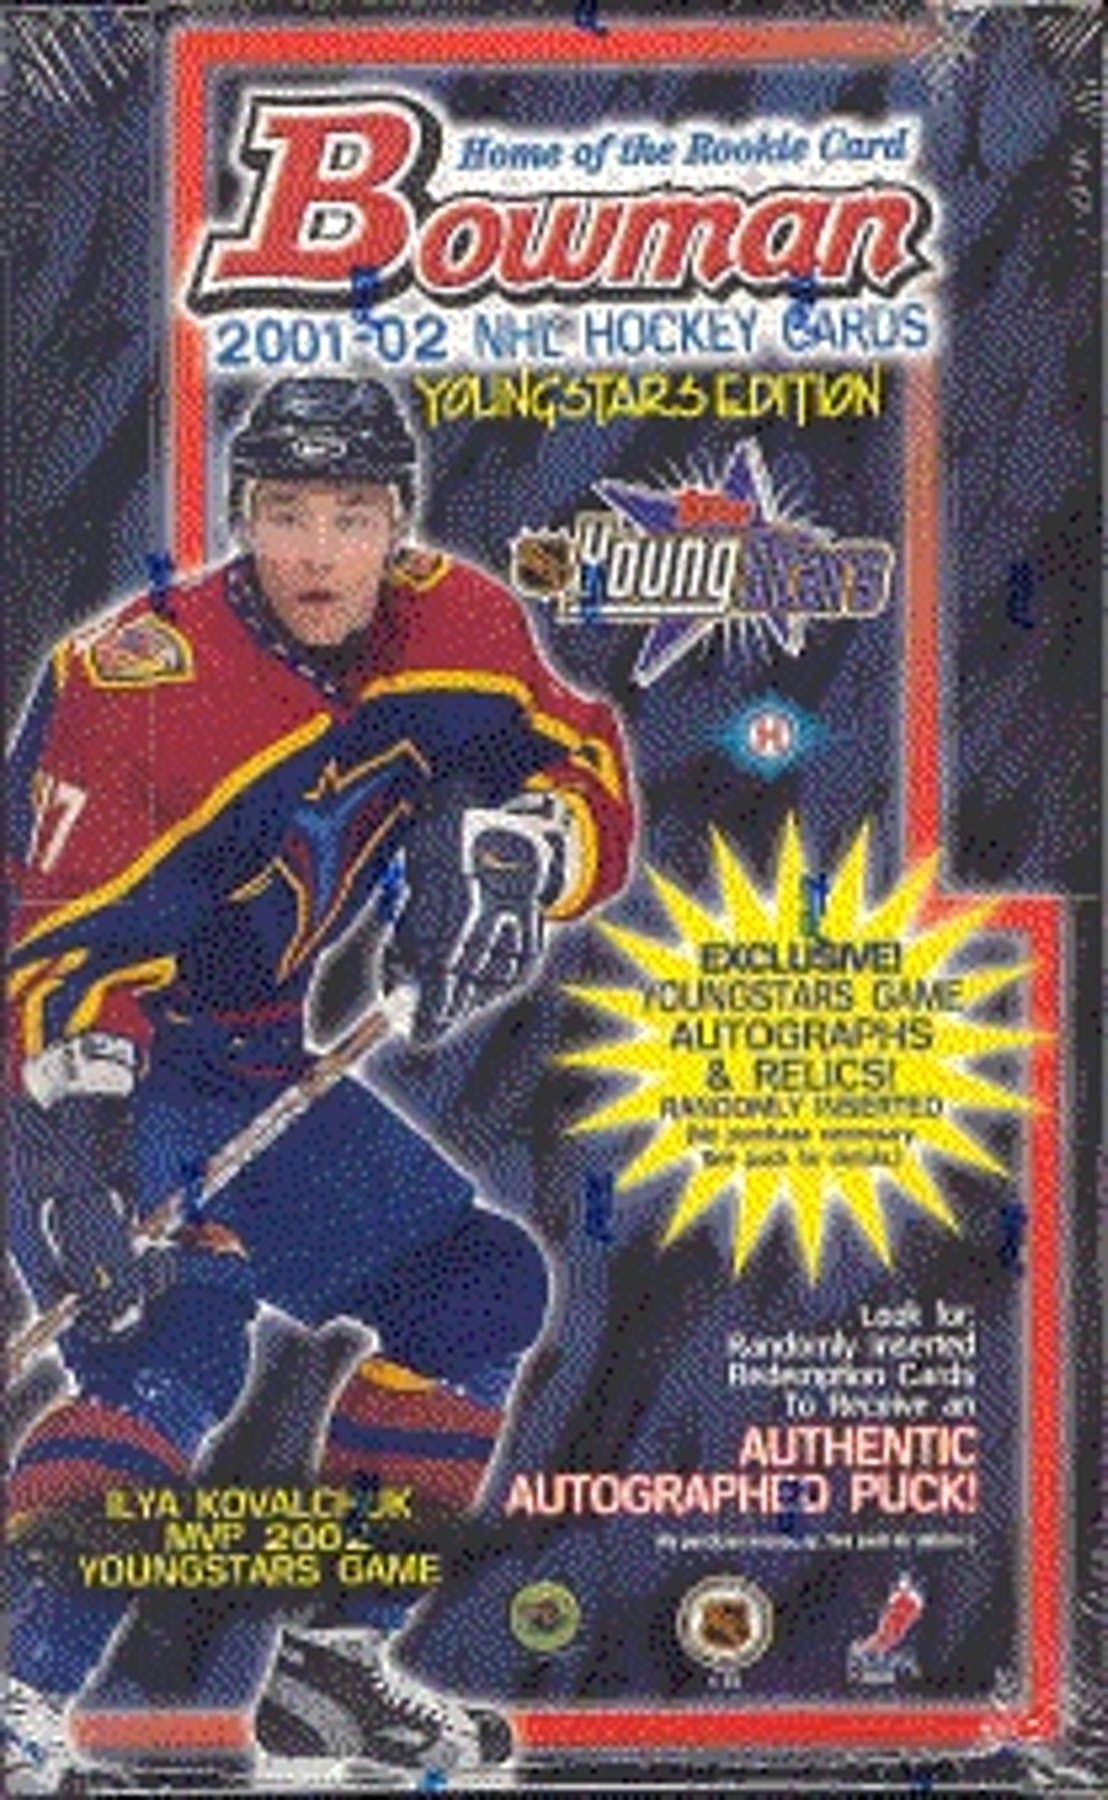 2001-02 Bowman Fabric of the Future ANDREW FERENCE JRSY at